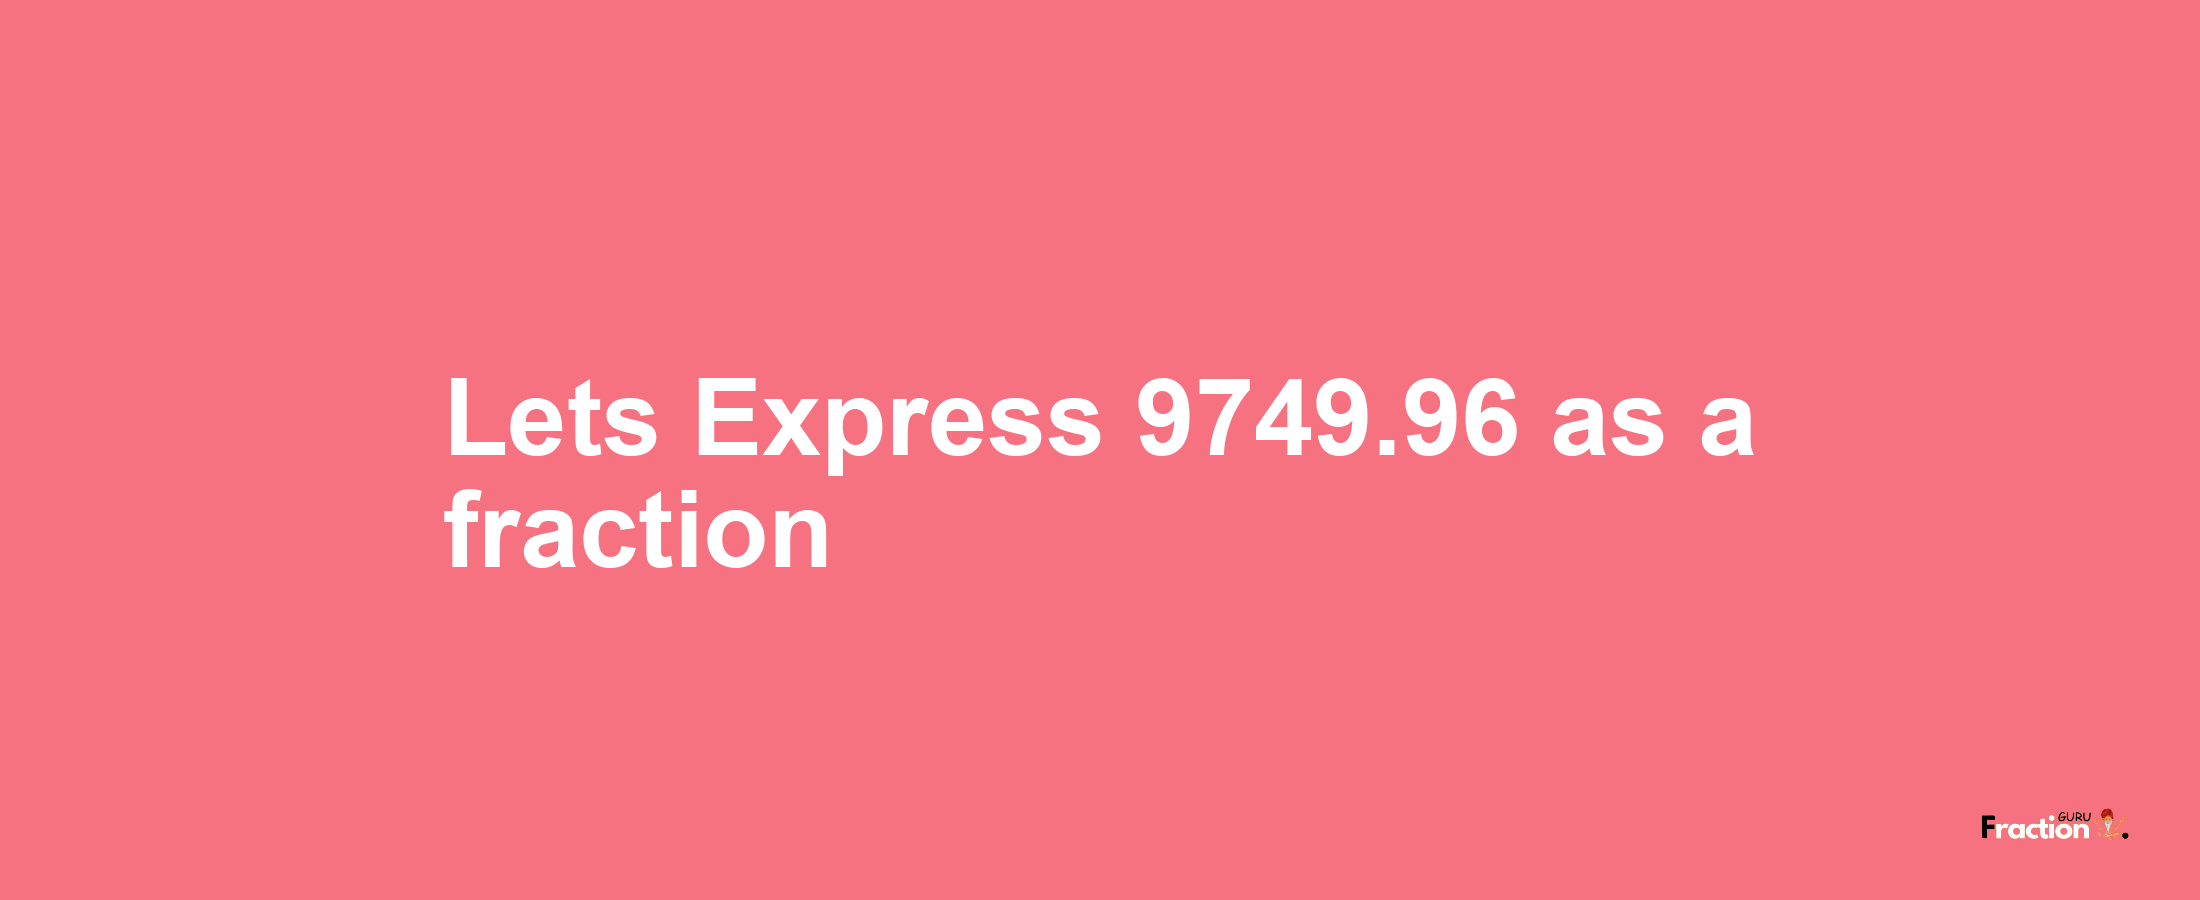 Lets Express 9749.96 as afraction